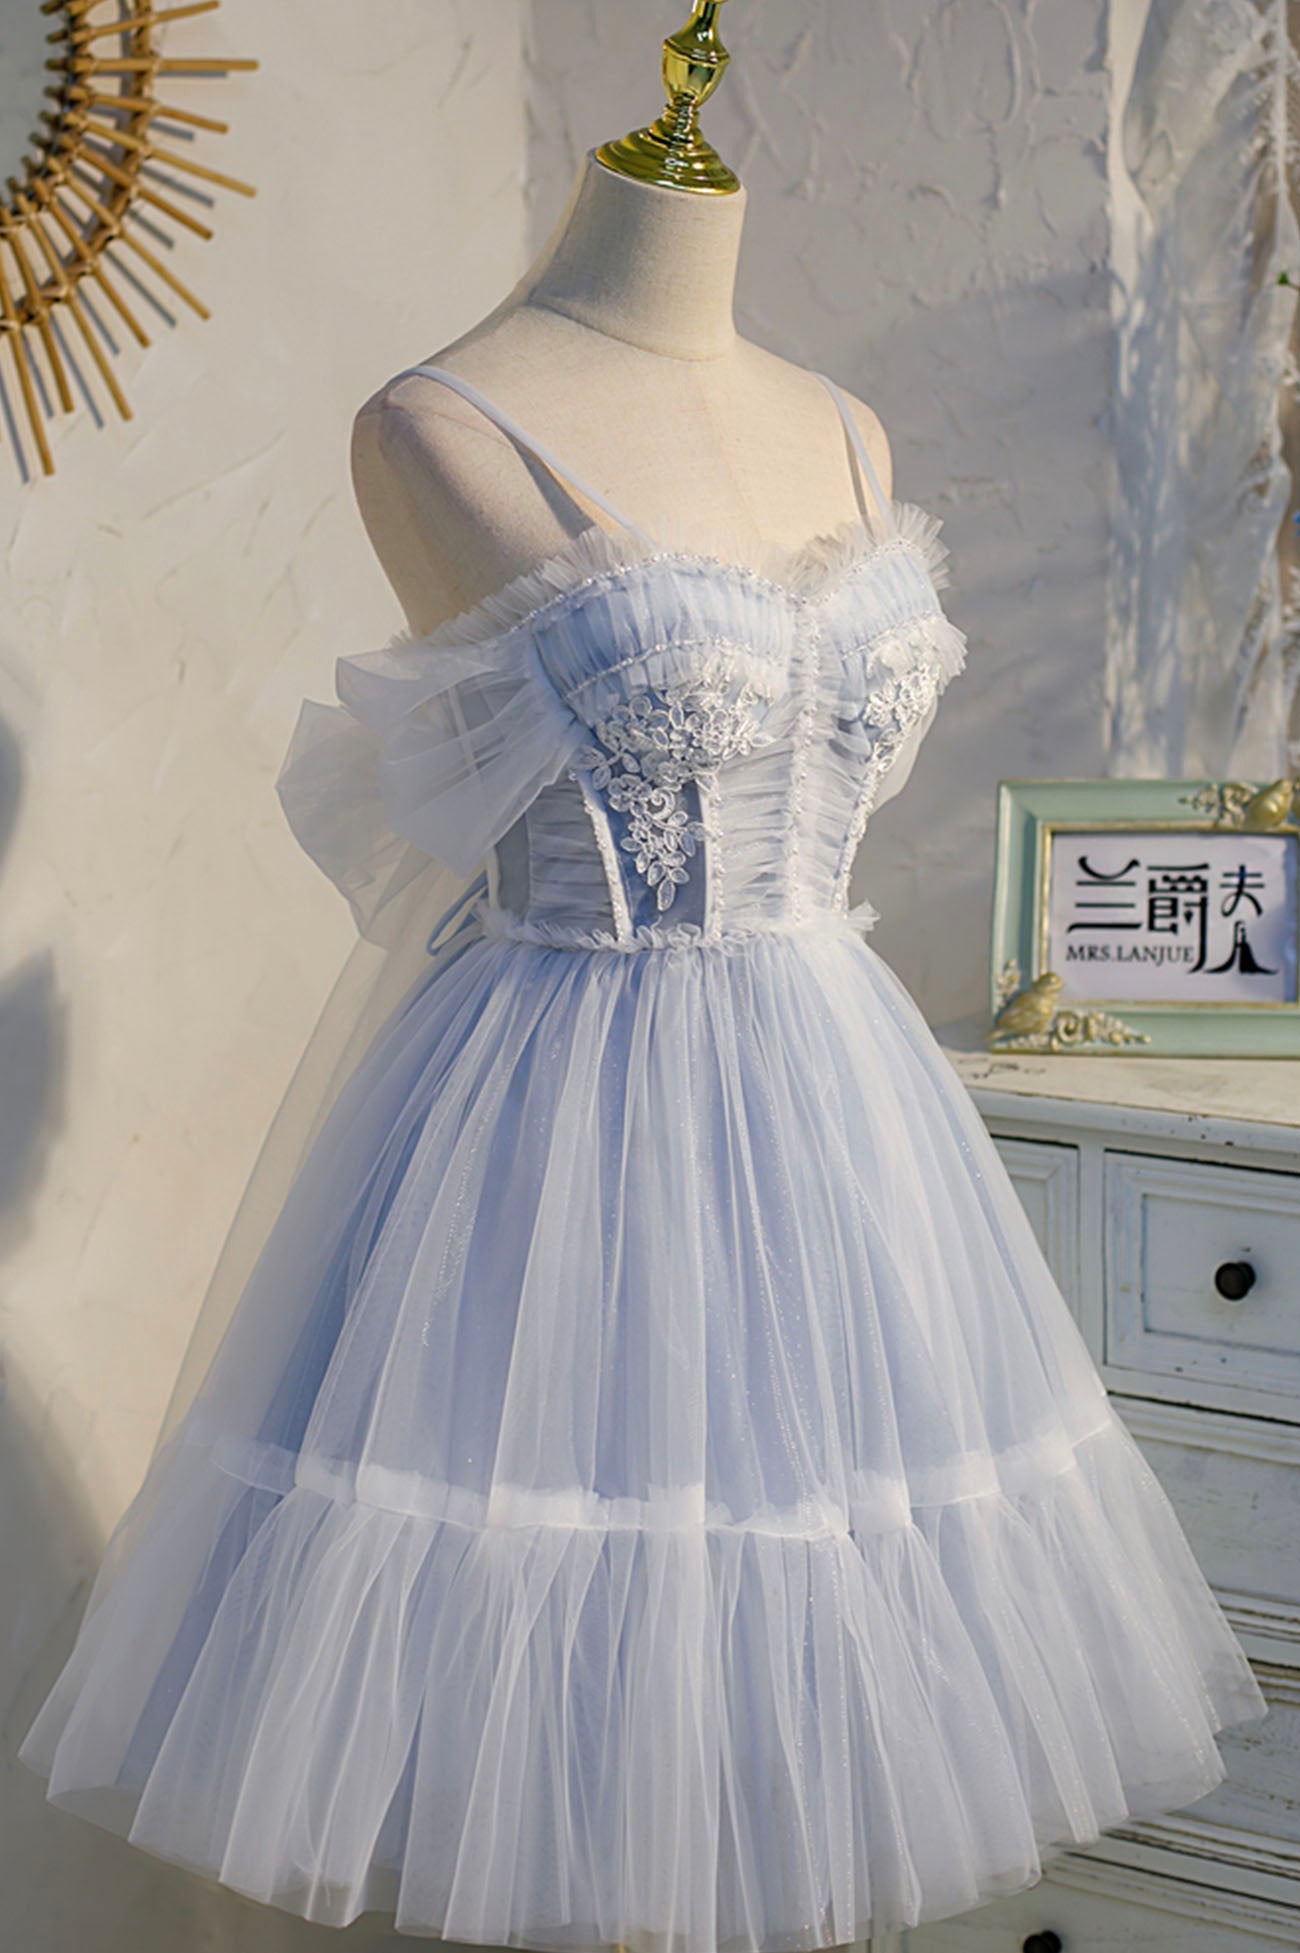 Homecoming Dress Modest, Lovely Tulle Spaghetti Strap Short Prom Dresses, A-Line Lace Homecoming Dresses